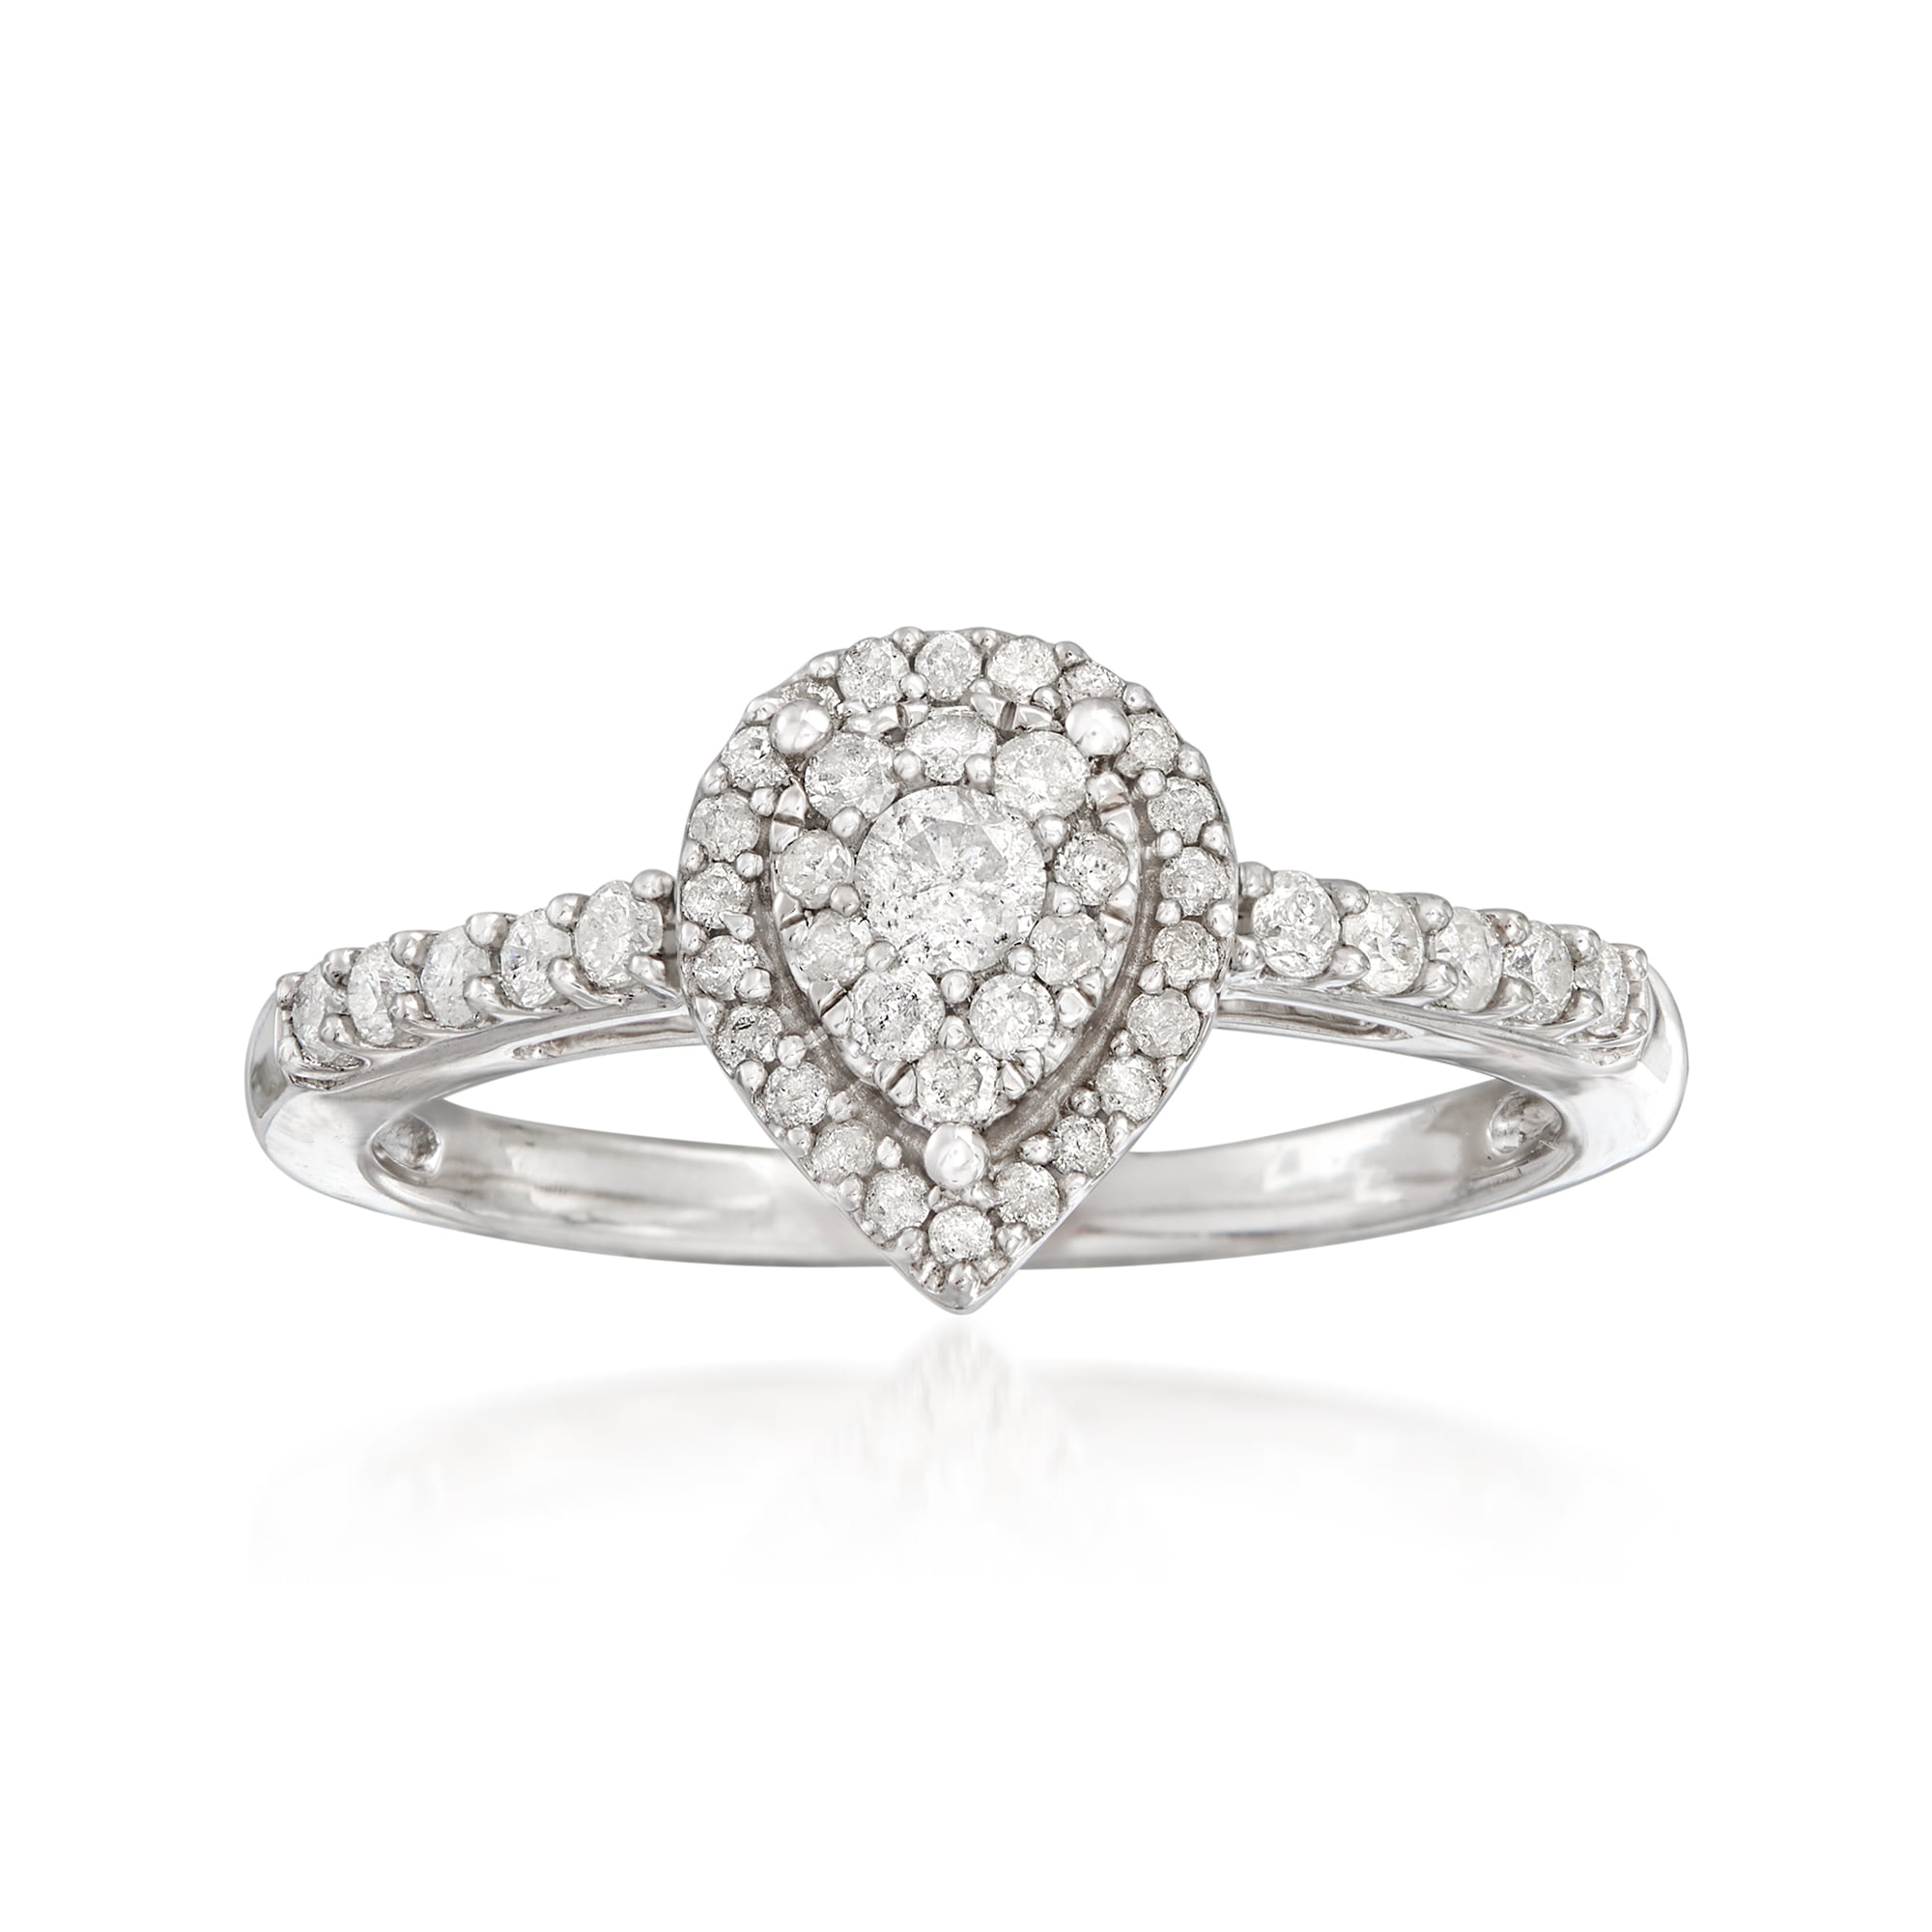 Ross-Simons 0.40 ct. t.w. Diamond Pear-Shaped Cluster Ring in 